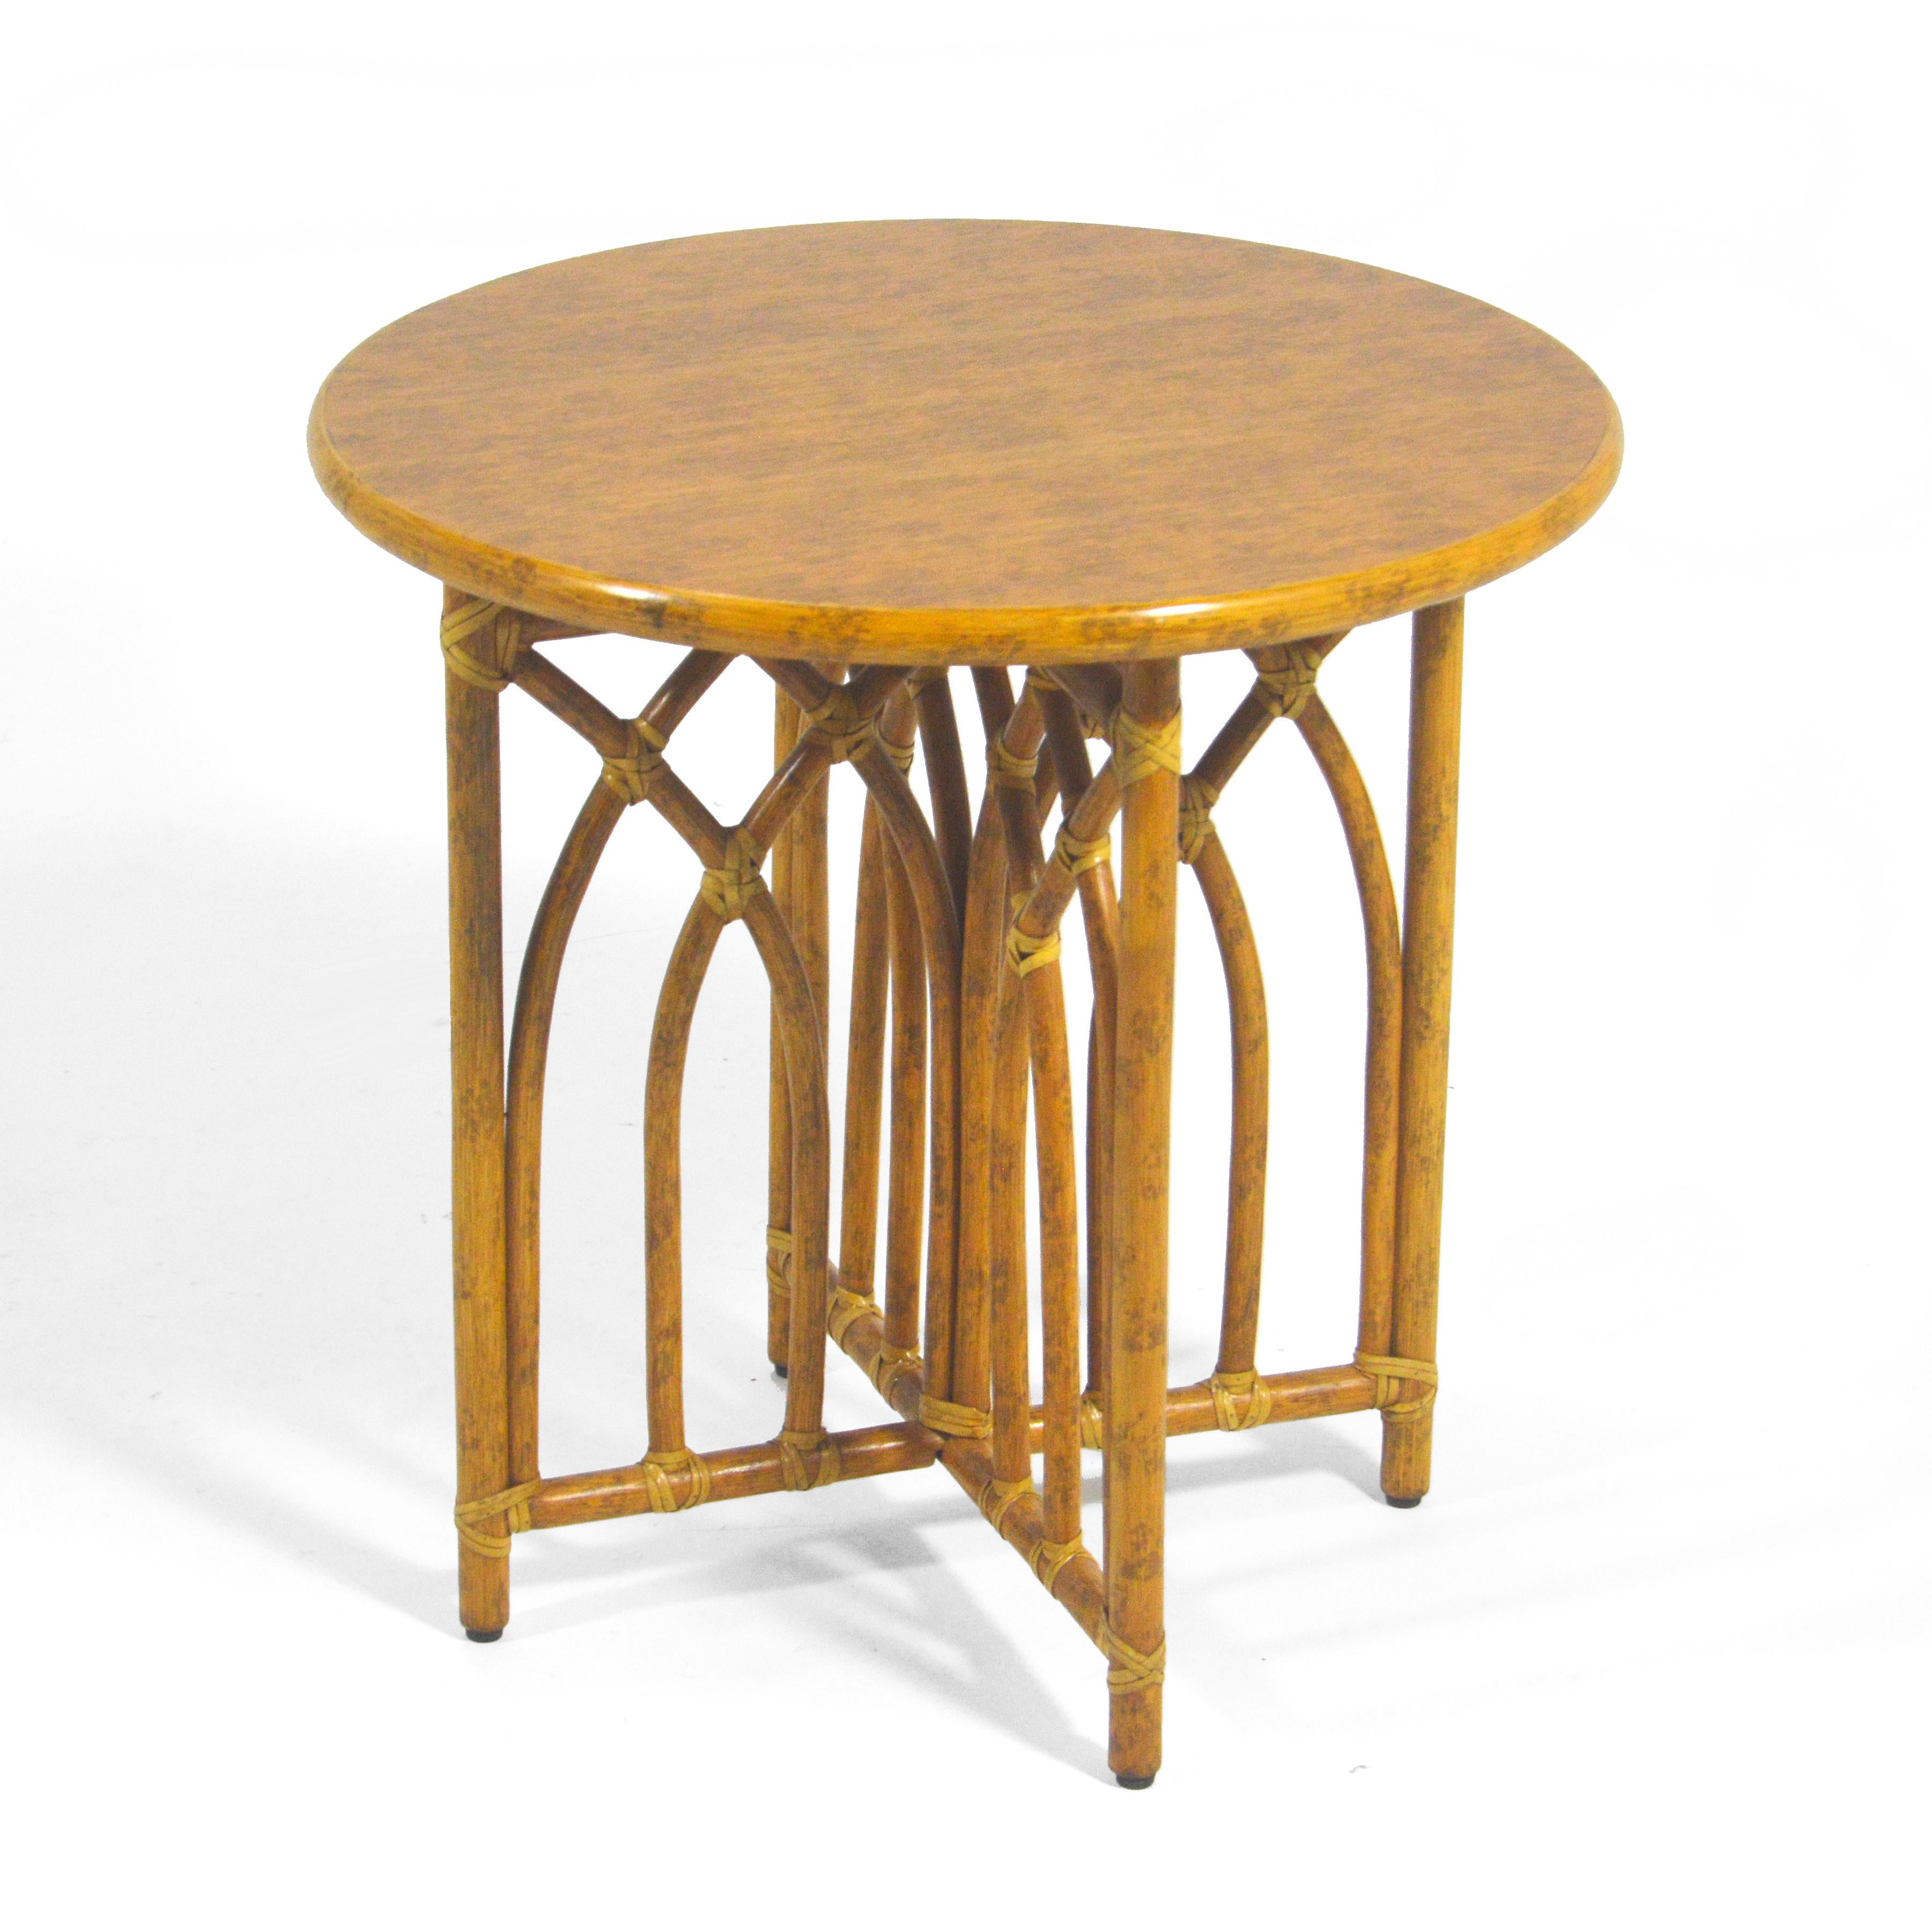 An exceptional design by Elinor & John McQuire for their eponymous company, this rattan side table has a subtle beauty and grace as well as an impeccable build quality. The organic modern rattan base has four legs with a cathedral arch design and is